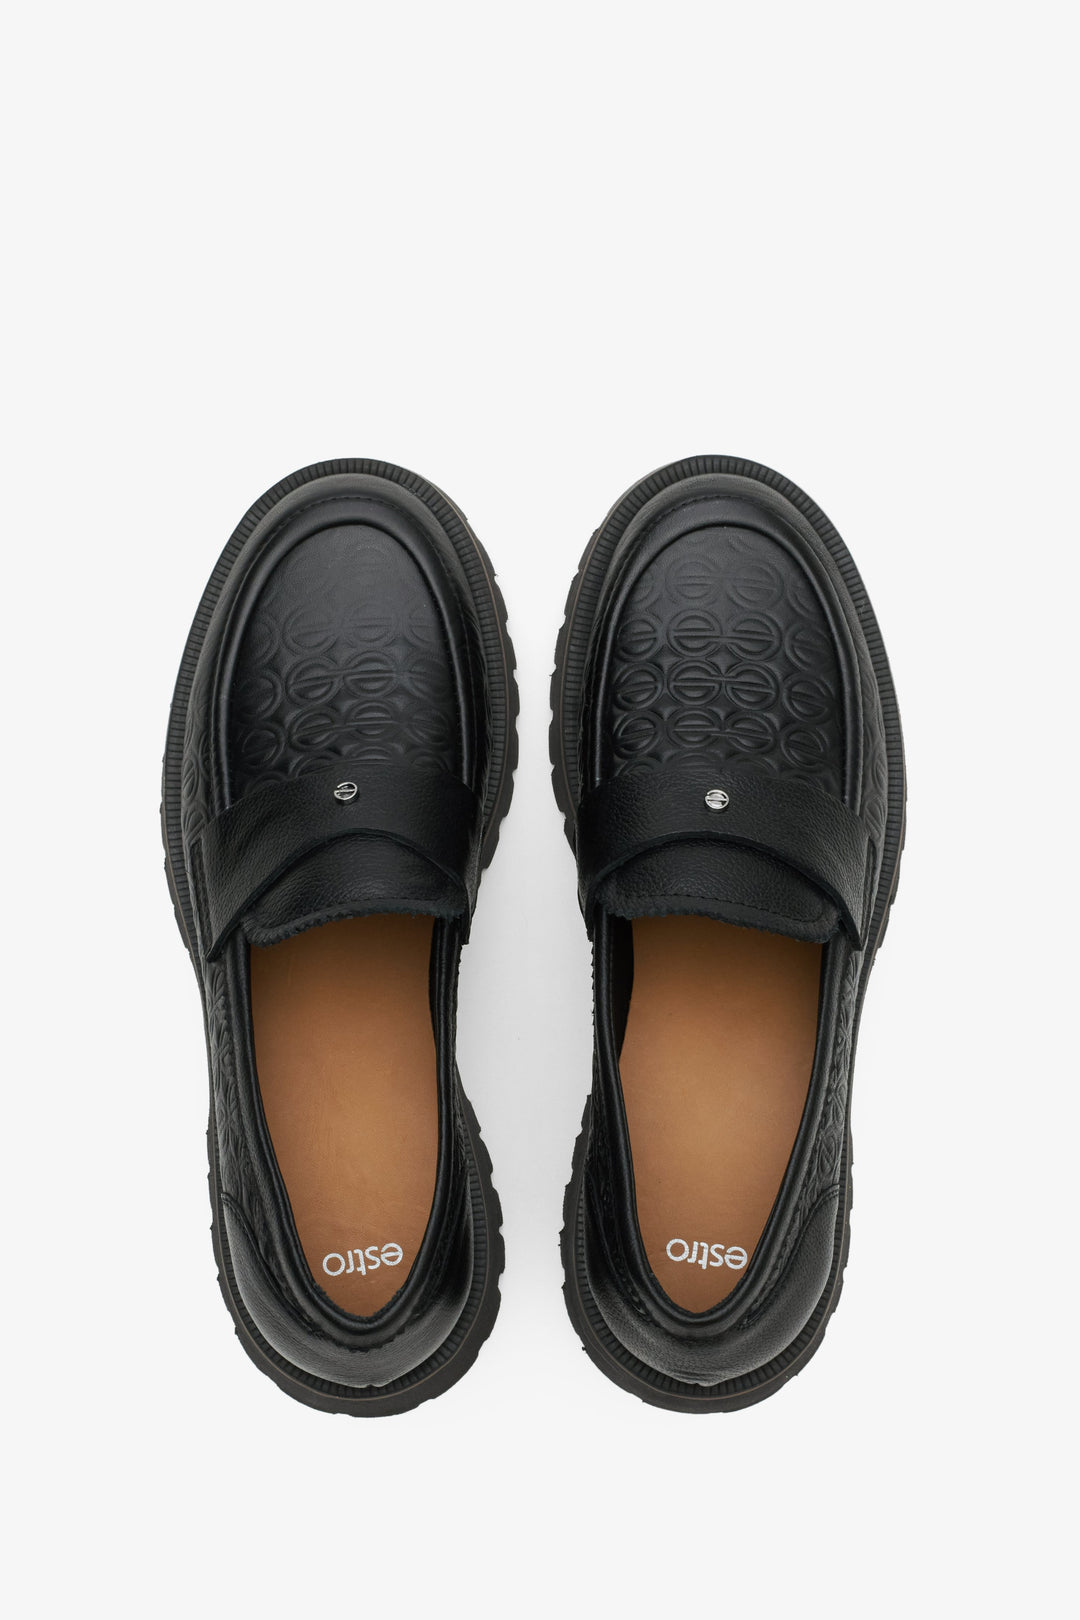 Black leather loafers made of textured genuine leather by Estro - top view presentation of the model.